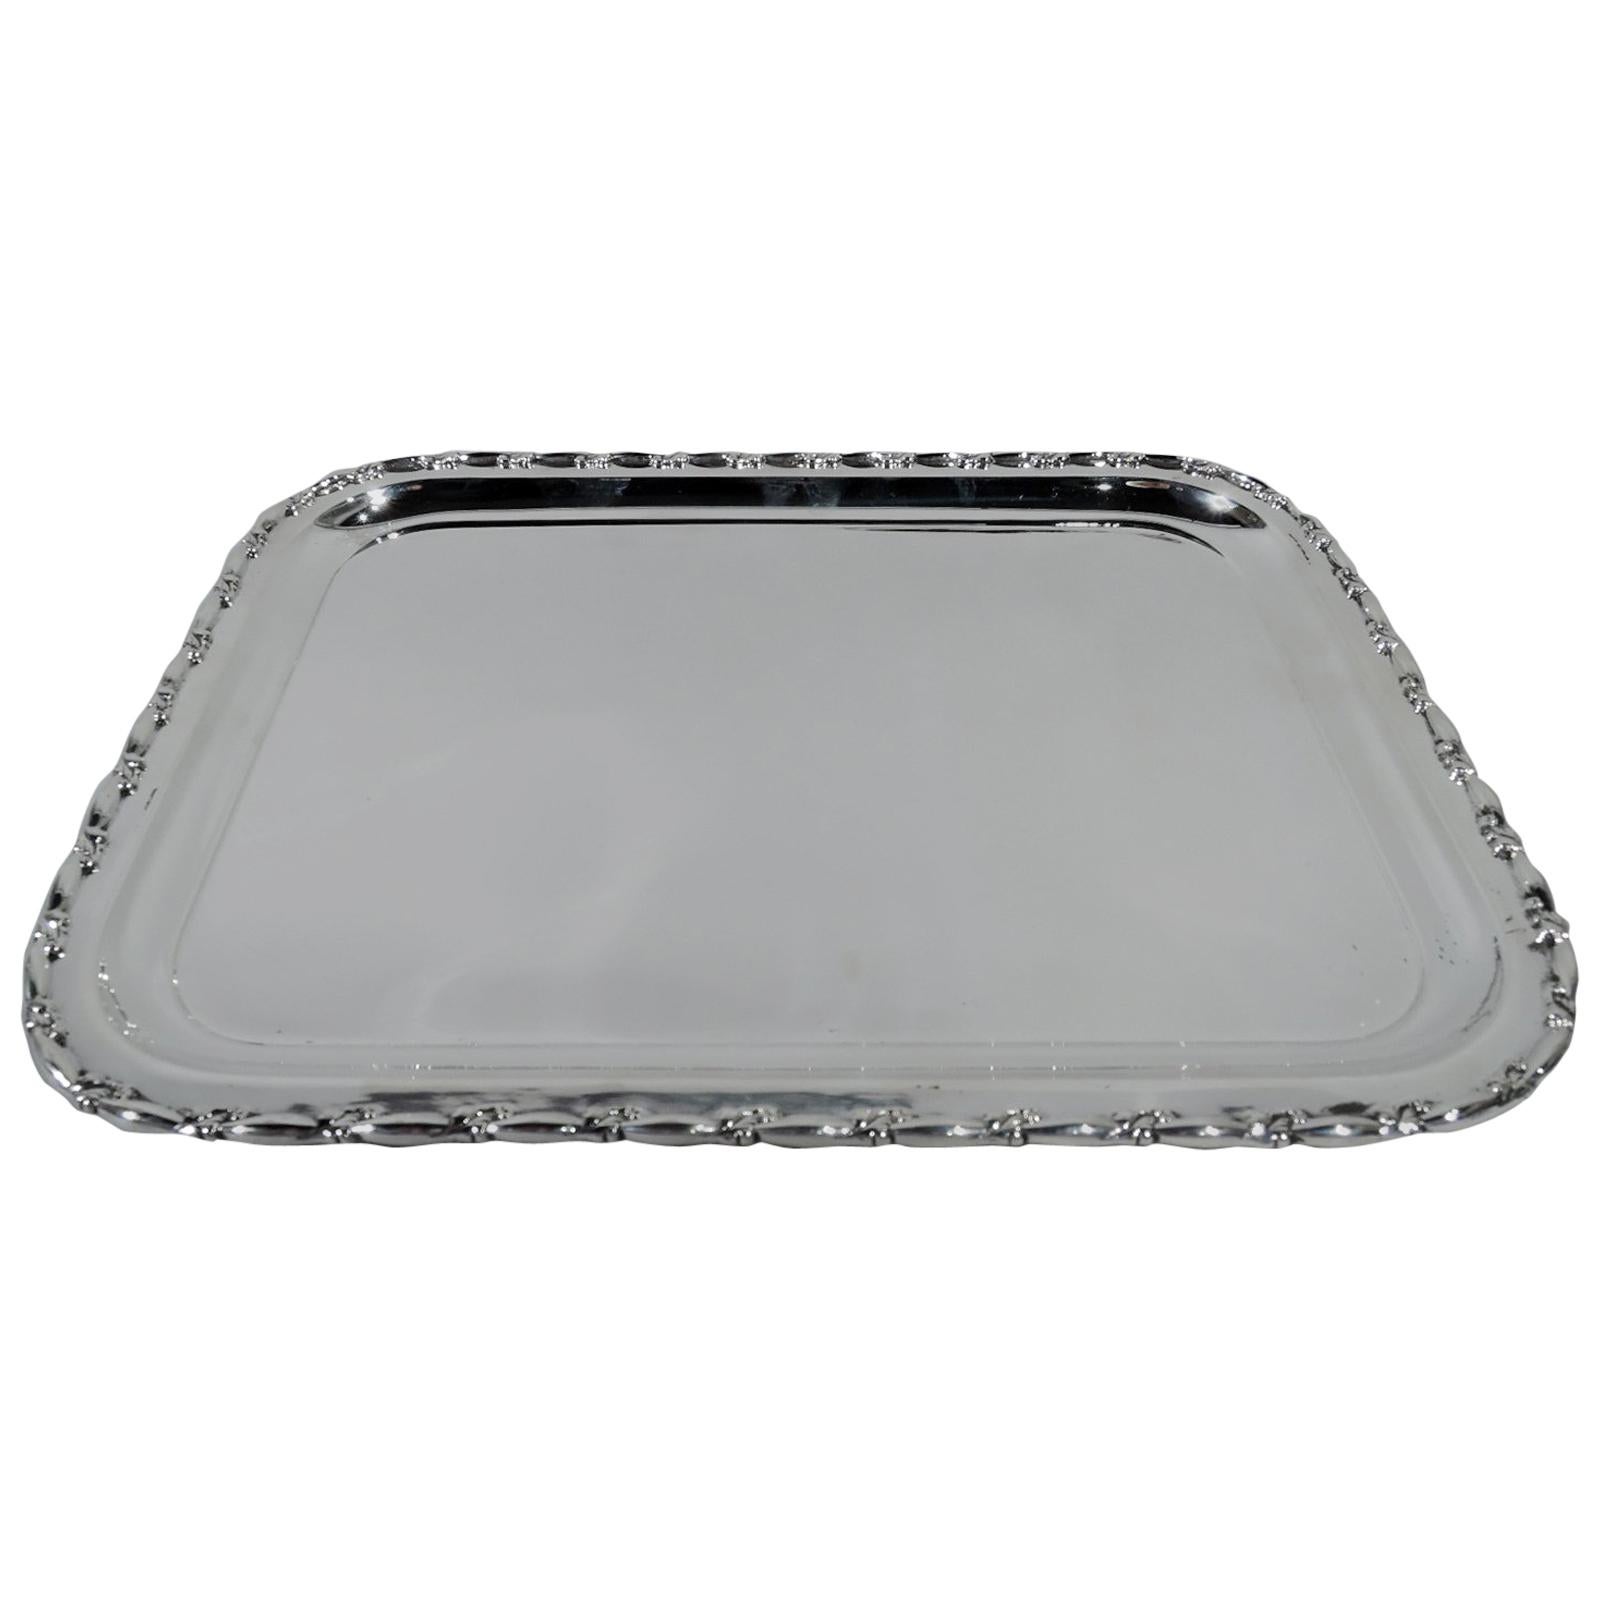 Pretty Midcentury Reed & Barton Sterling Silver Tray